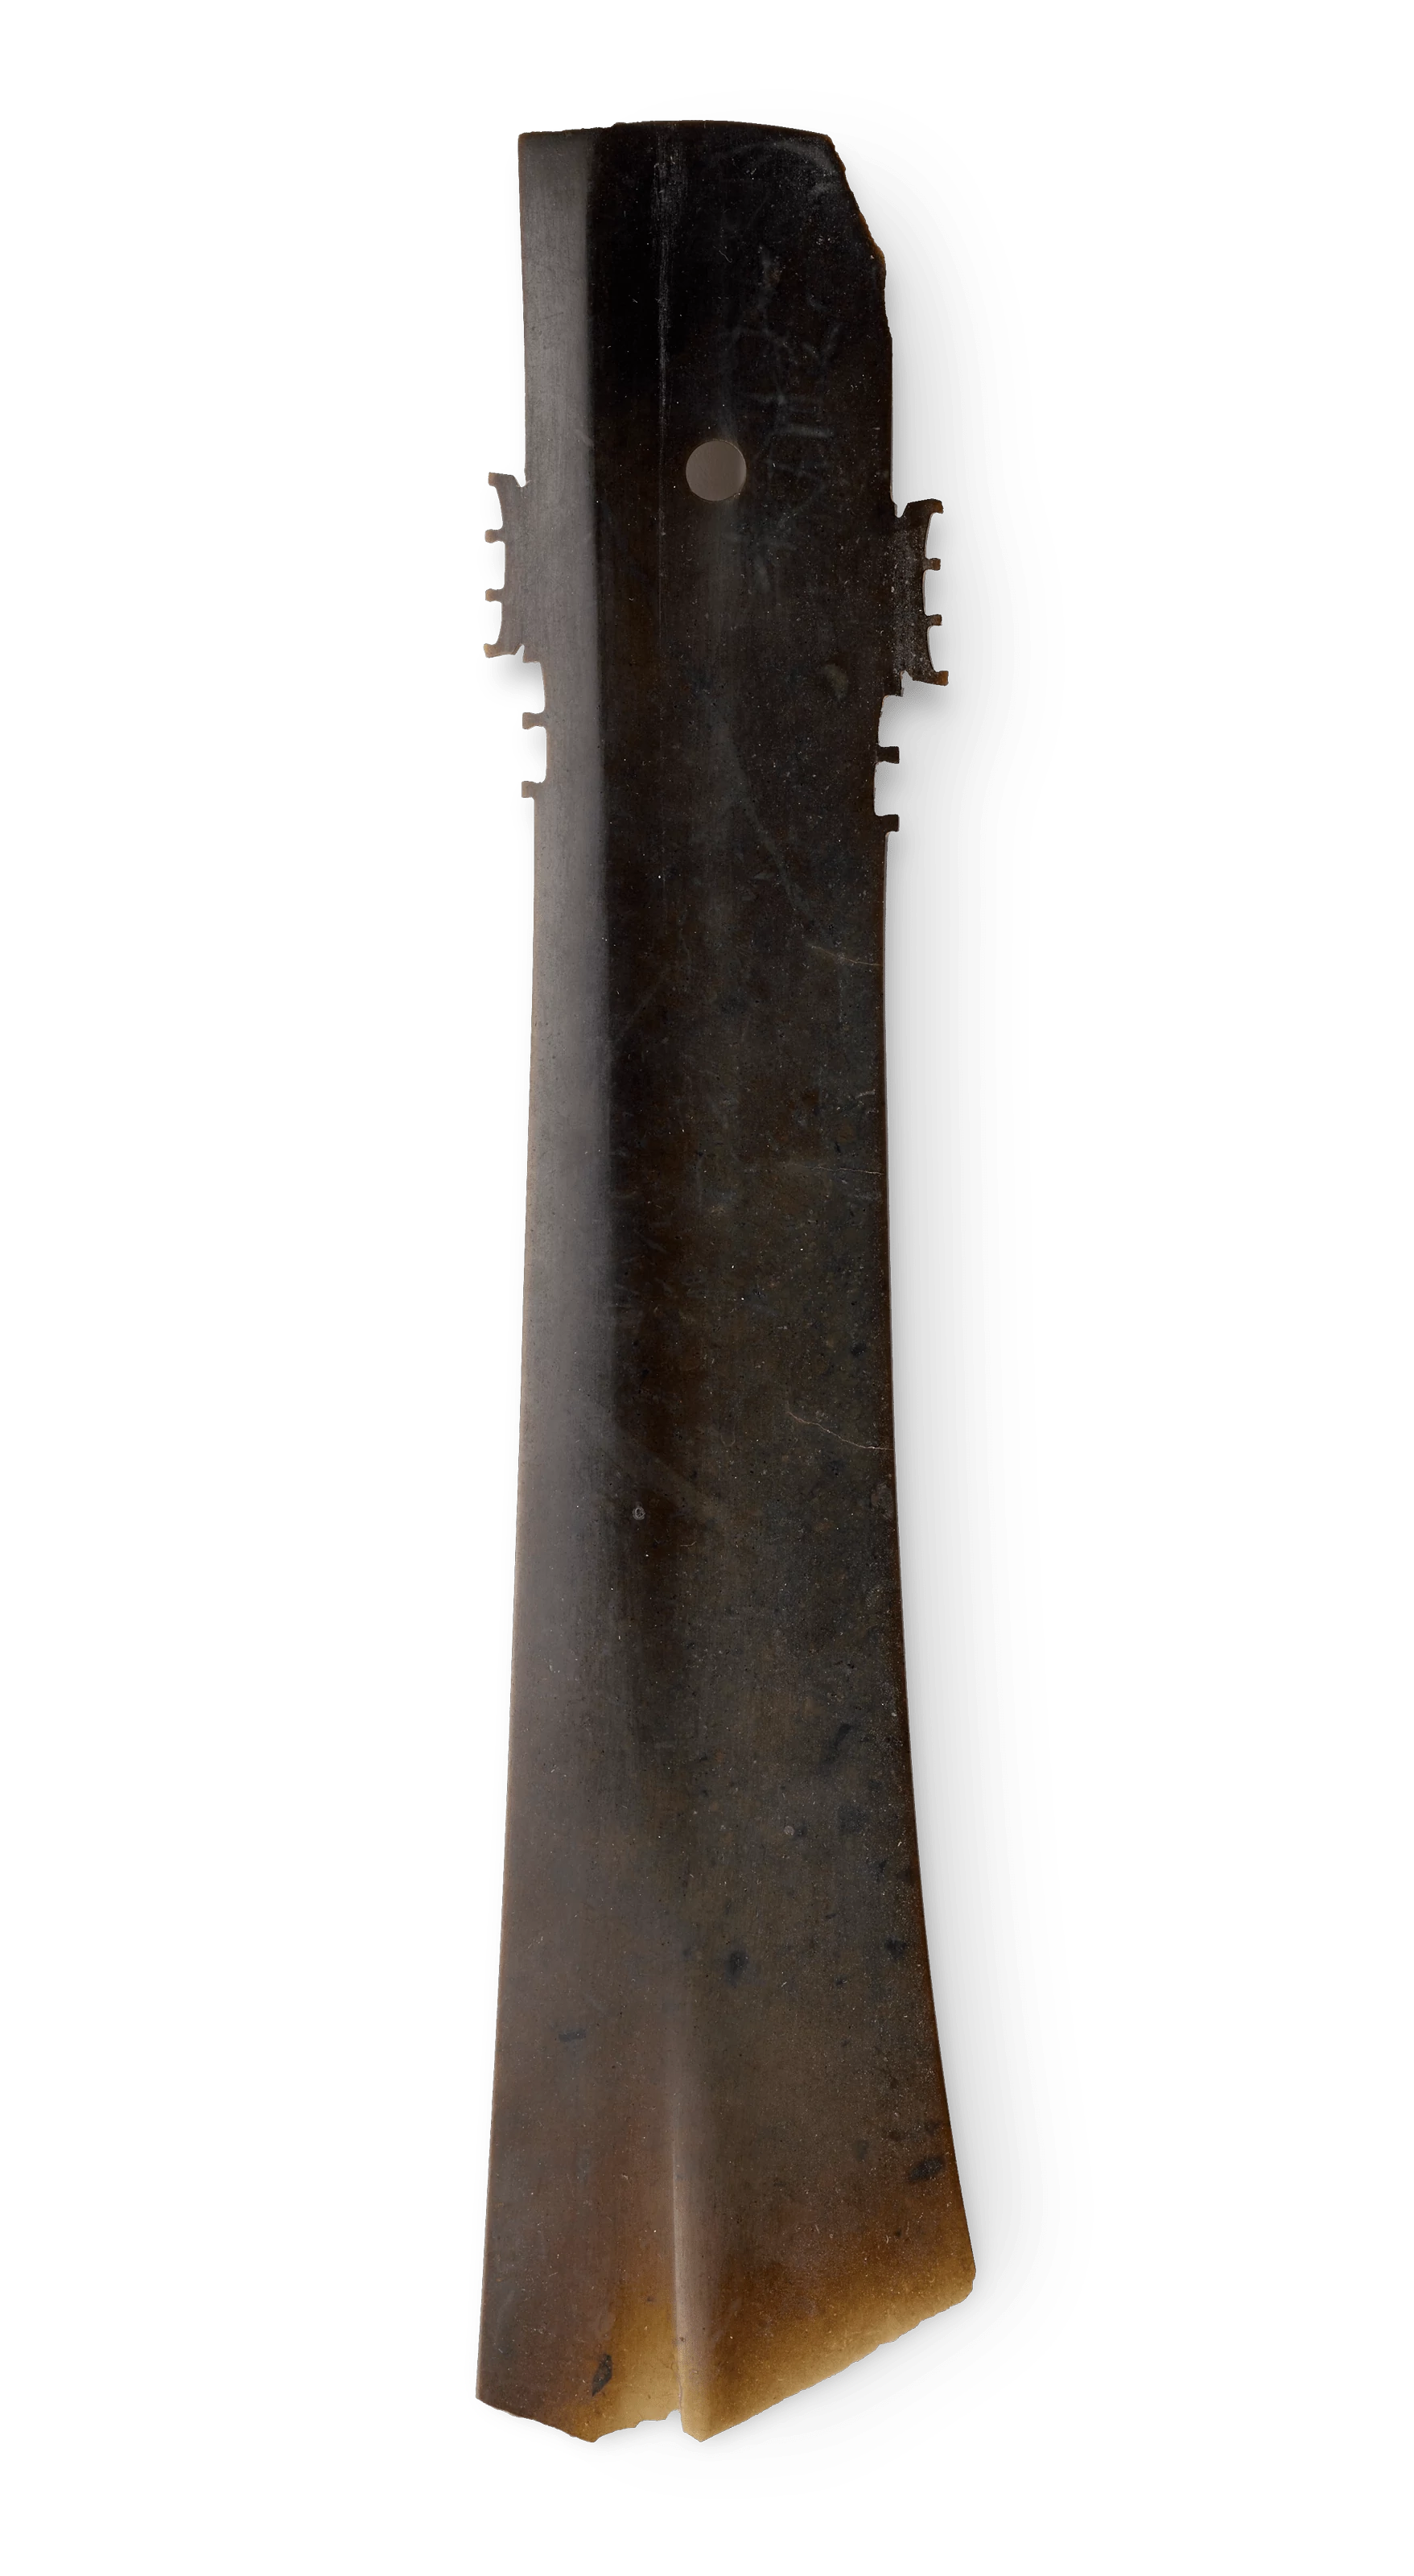 Forked blade, 璋 (Zhang), Ancient China